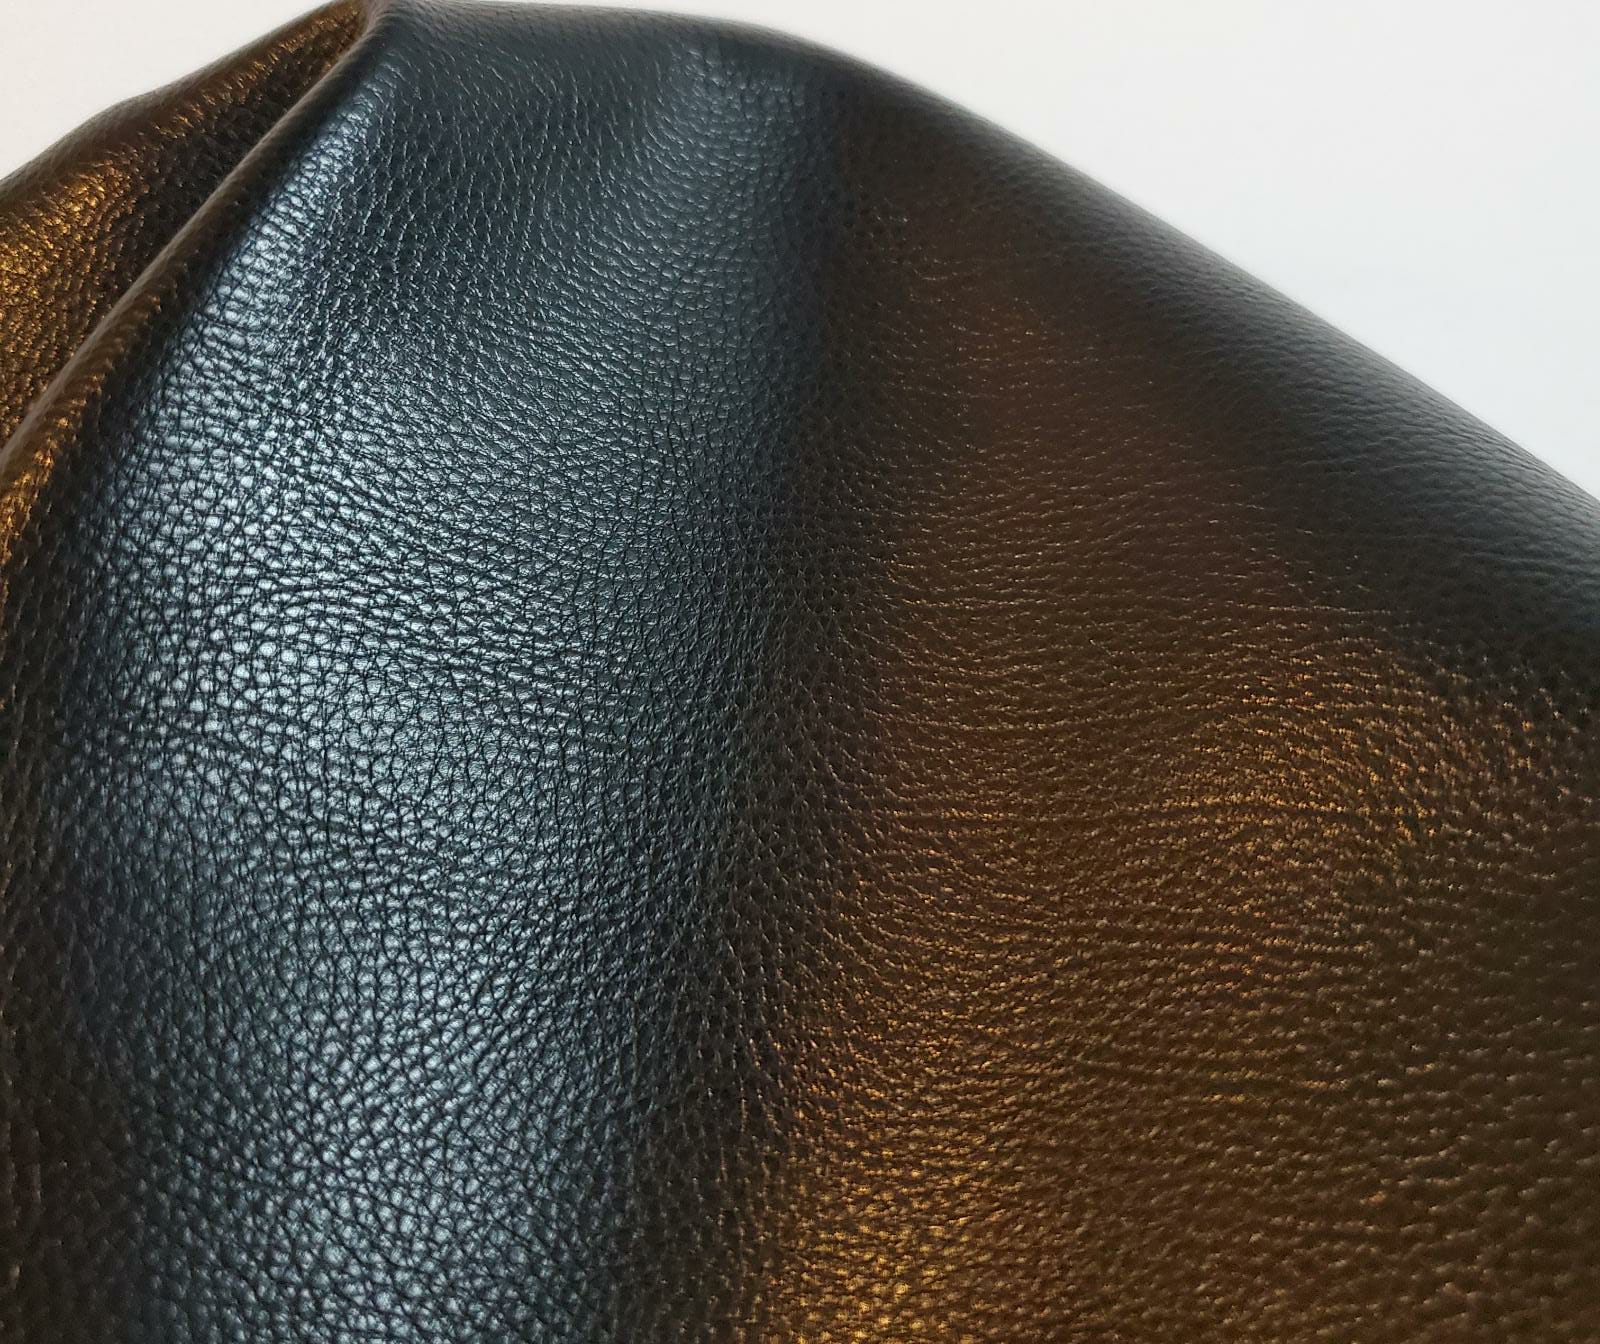  Faux vegan leather by the yard sheets distressed leather fabric for upholstery 30,000 Double Rubs vinyl sheets nappa leather crafts bookbinding books furniture fabrics uphilstery fuax material pu pleather faiux learher cruelty free nappa seat black pebble